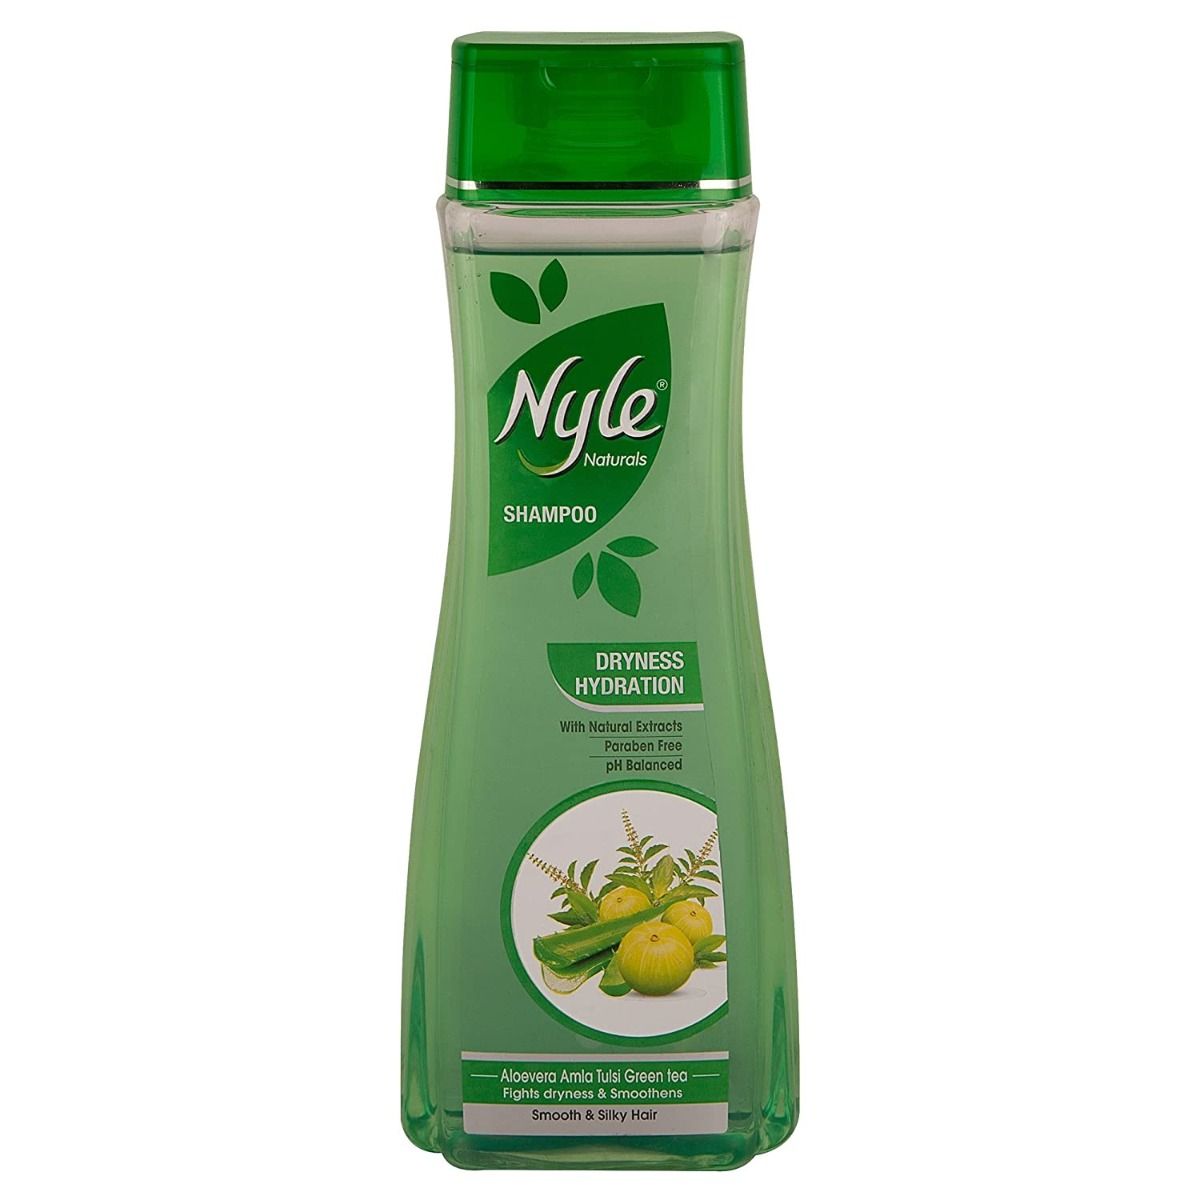 Nyle Dryness Hydration Shampoo, 400 ml, Pack of 1 